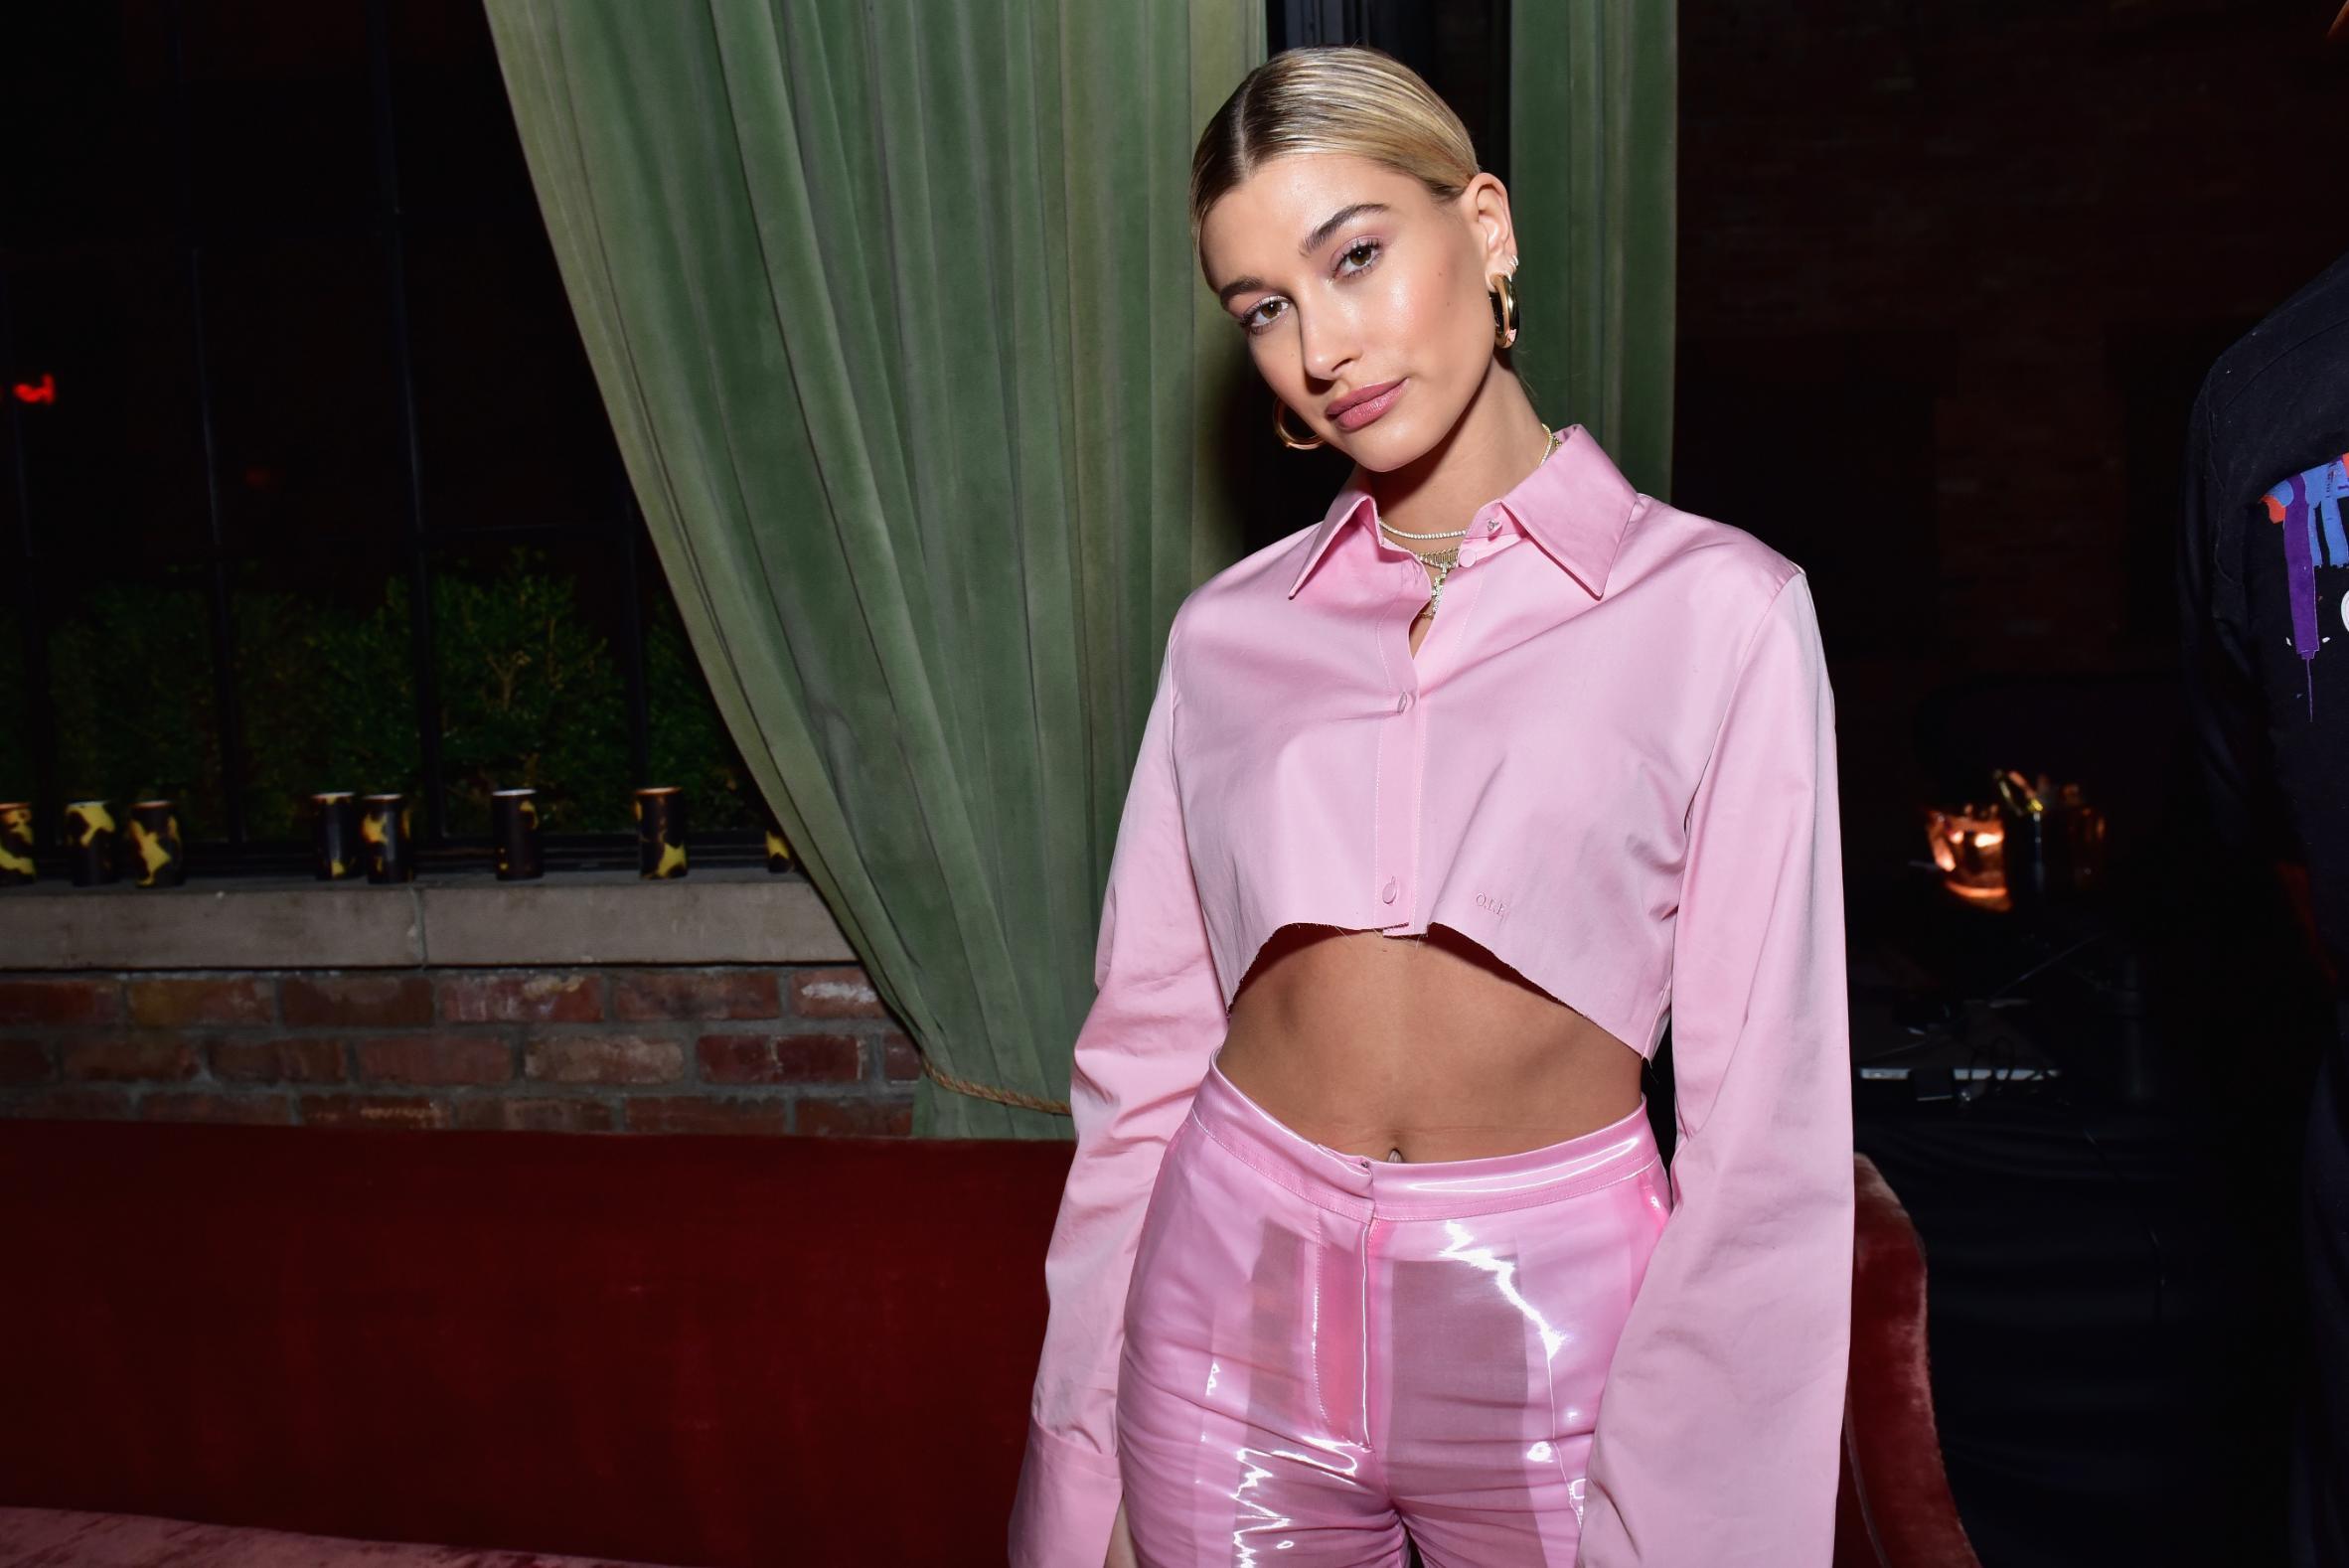 Who is Hailey Baldwin? Model and Justin Bieber's fiancee